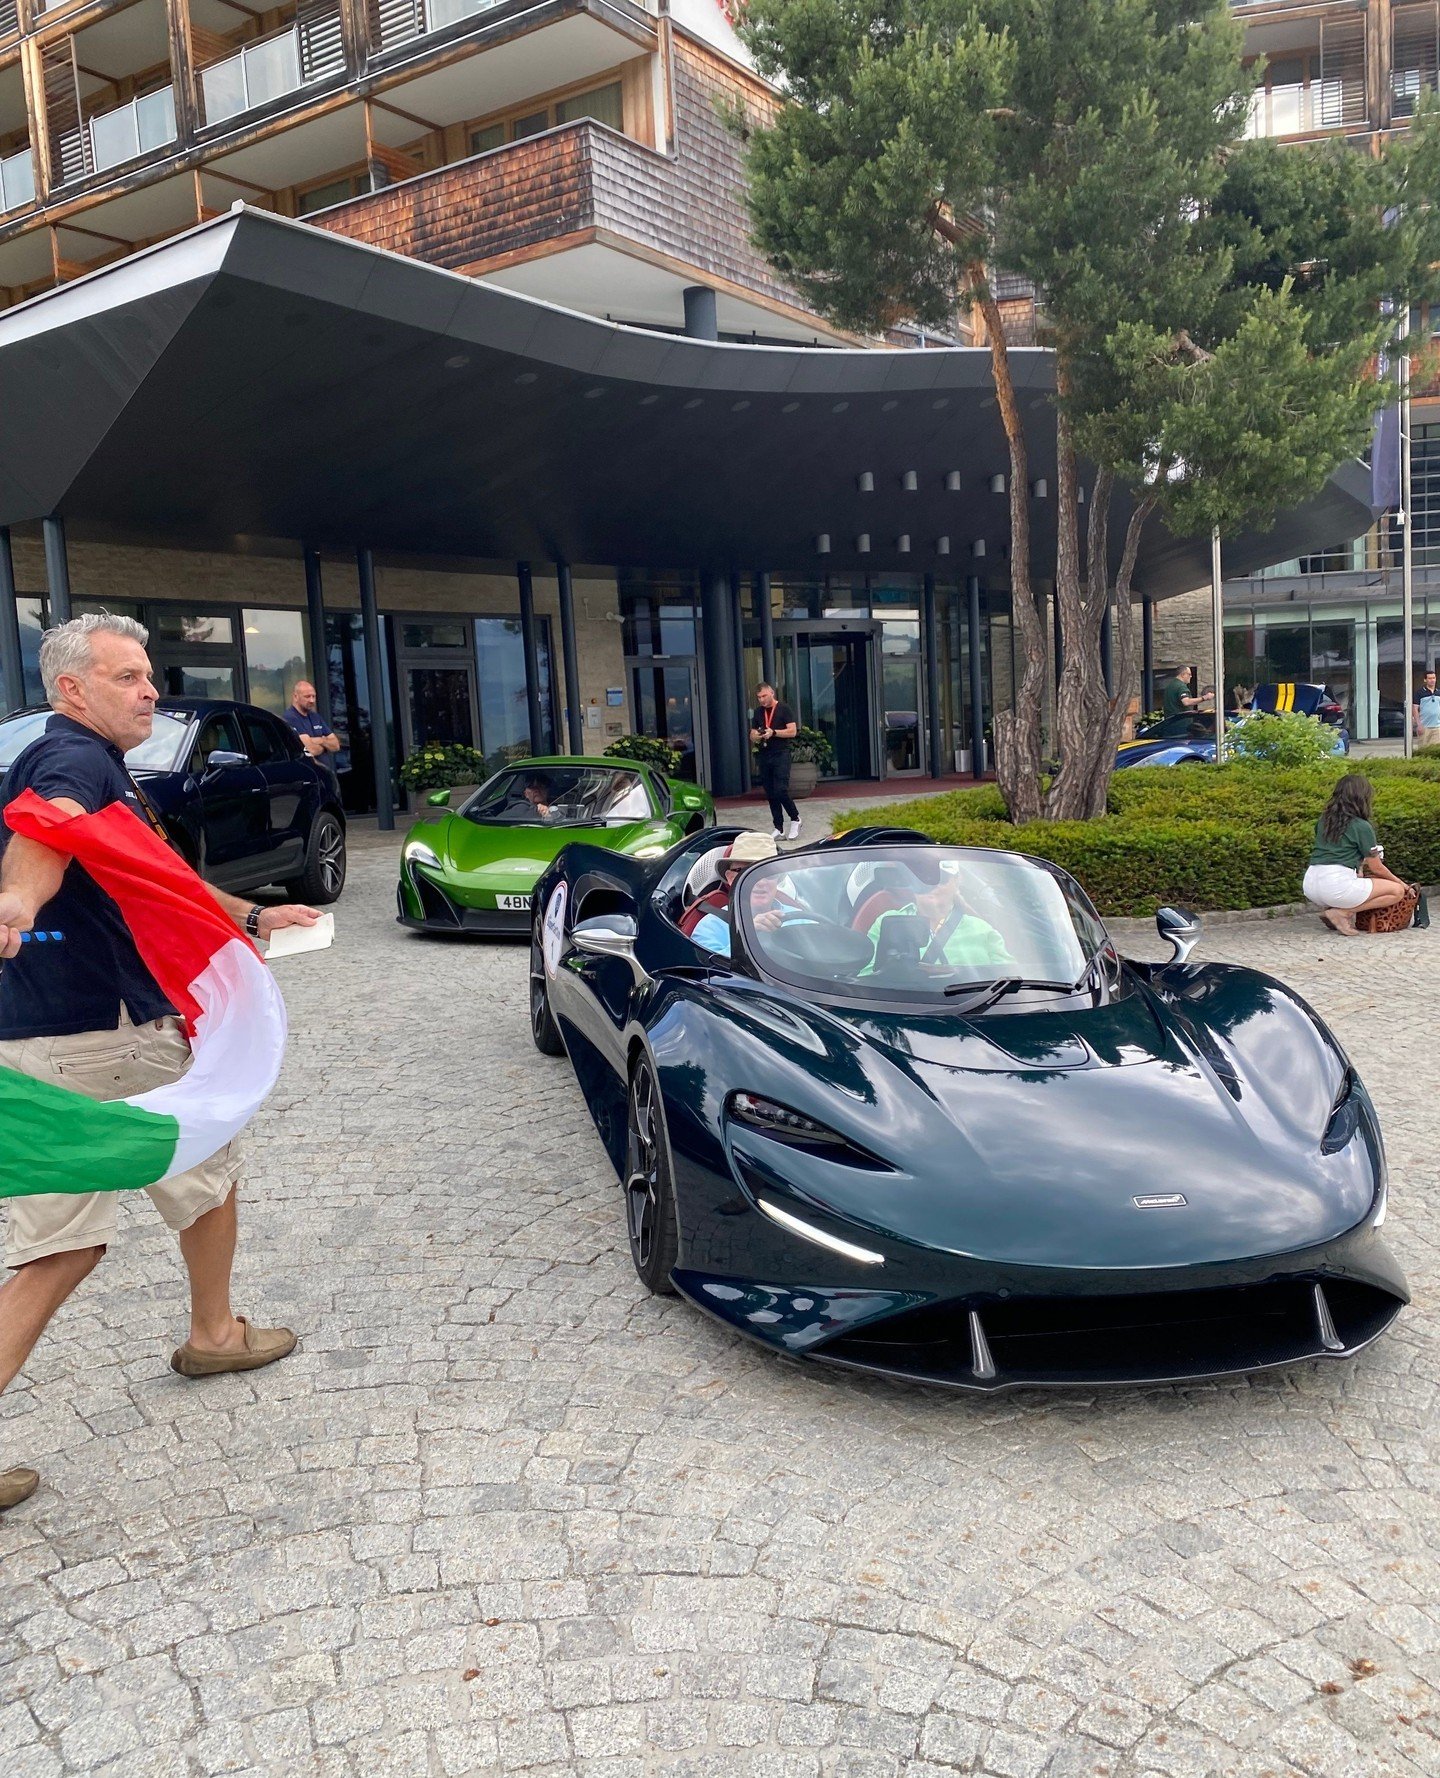 Beautiful Elva crossing the start line in Austria on the 2022 Supercar Run.⁠
⁠
DM us for info on our 2024 Giro d'Italia in June - you do not want to miss this!⁠
⁠
⁠
#supercar #supercars #SupercarLifestyle #SupercarsBuzz #supercarspotting #SuperCarSun